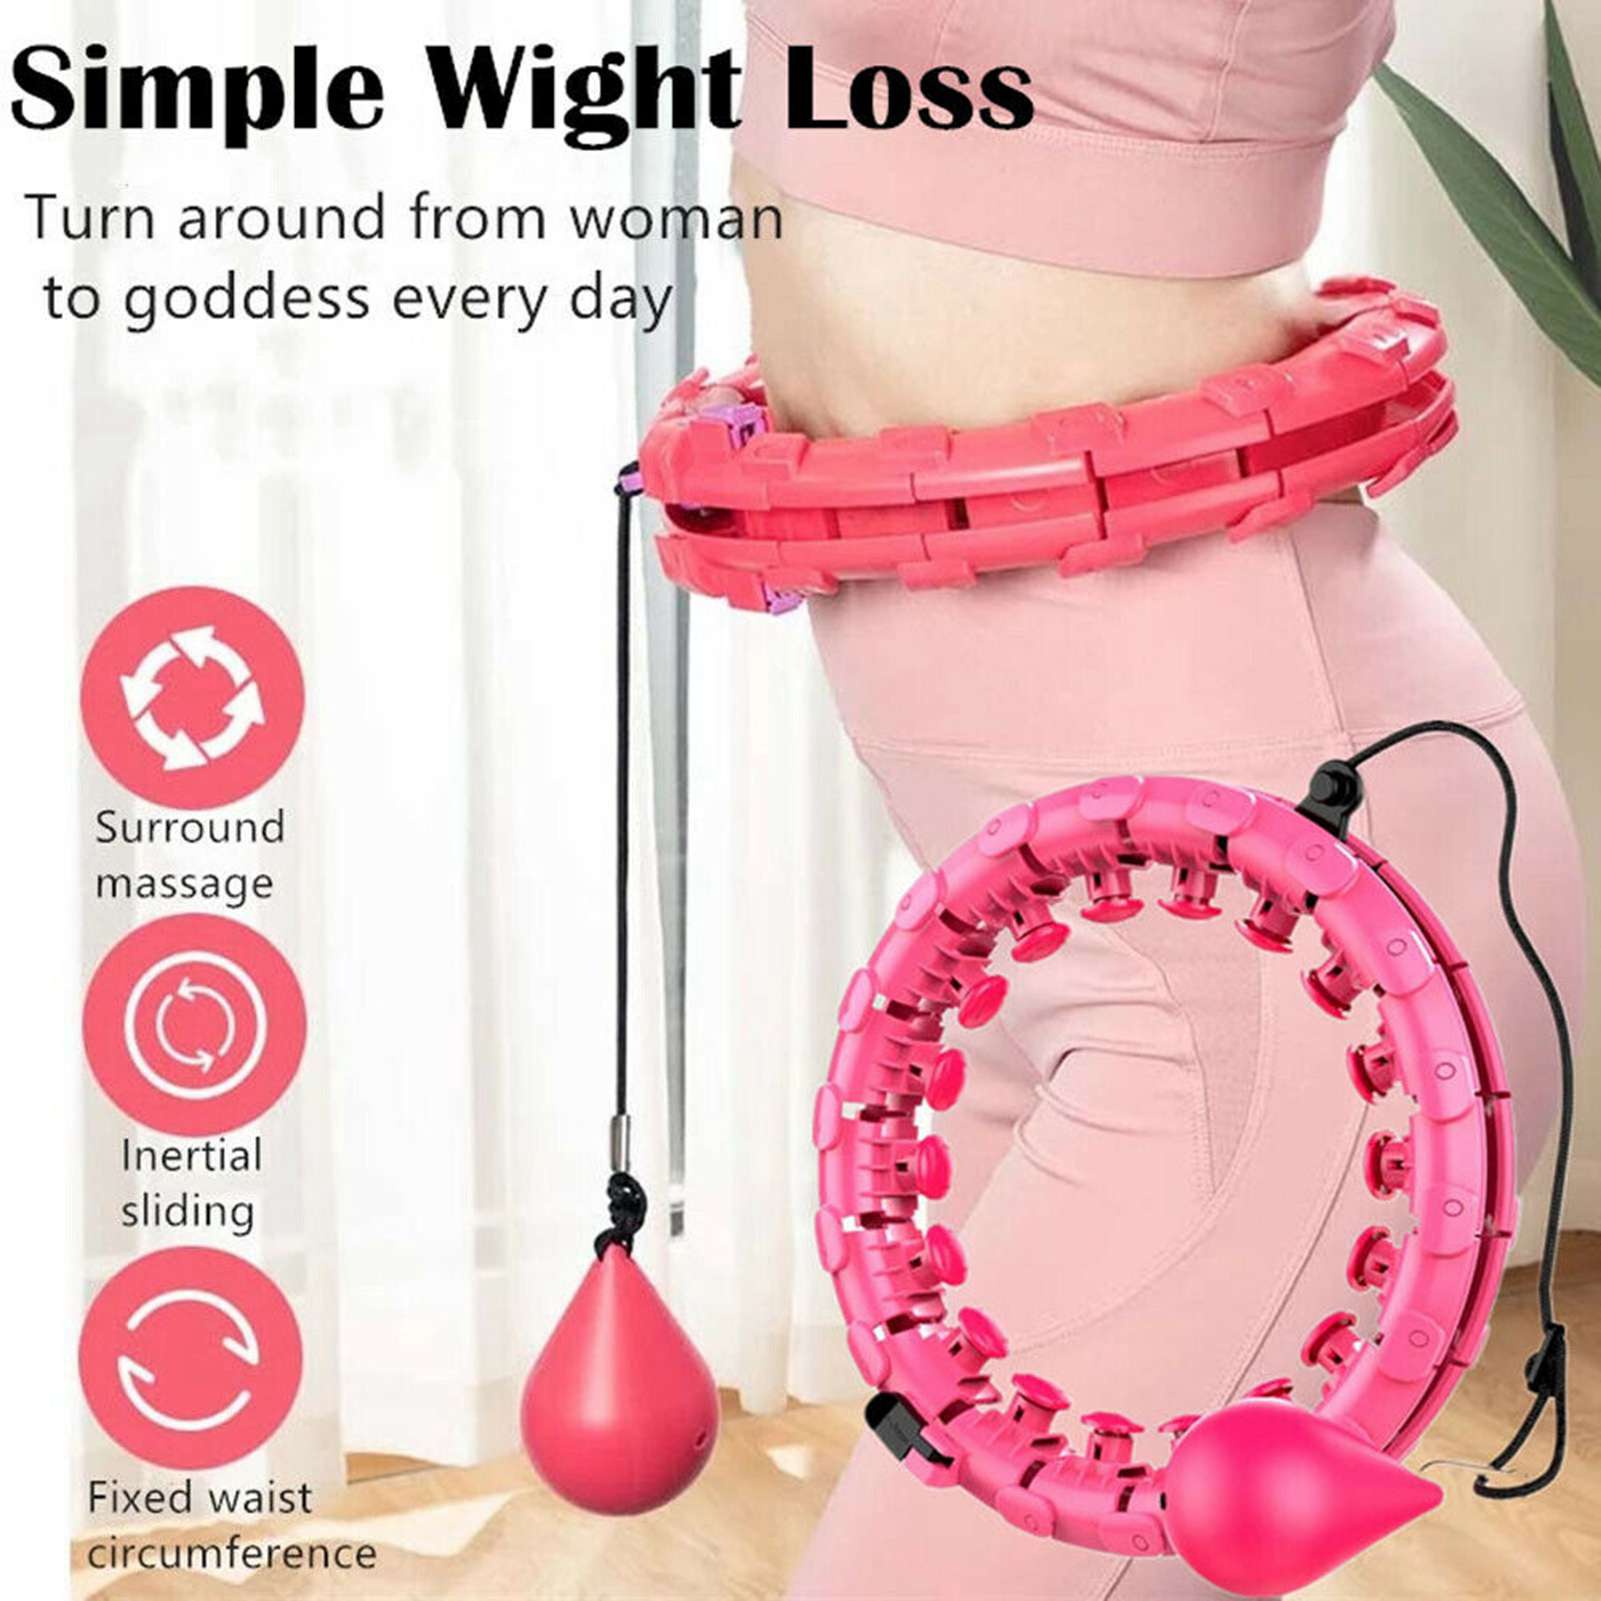 Weighted Smart Hoola Hoop 2 in1 Massage Fitness Hoola Hoops for Adults and Kids Sports 24 Detachable Knots Adjustable Weight Auto-Spinning Ball